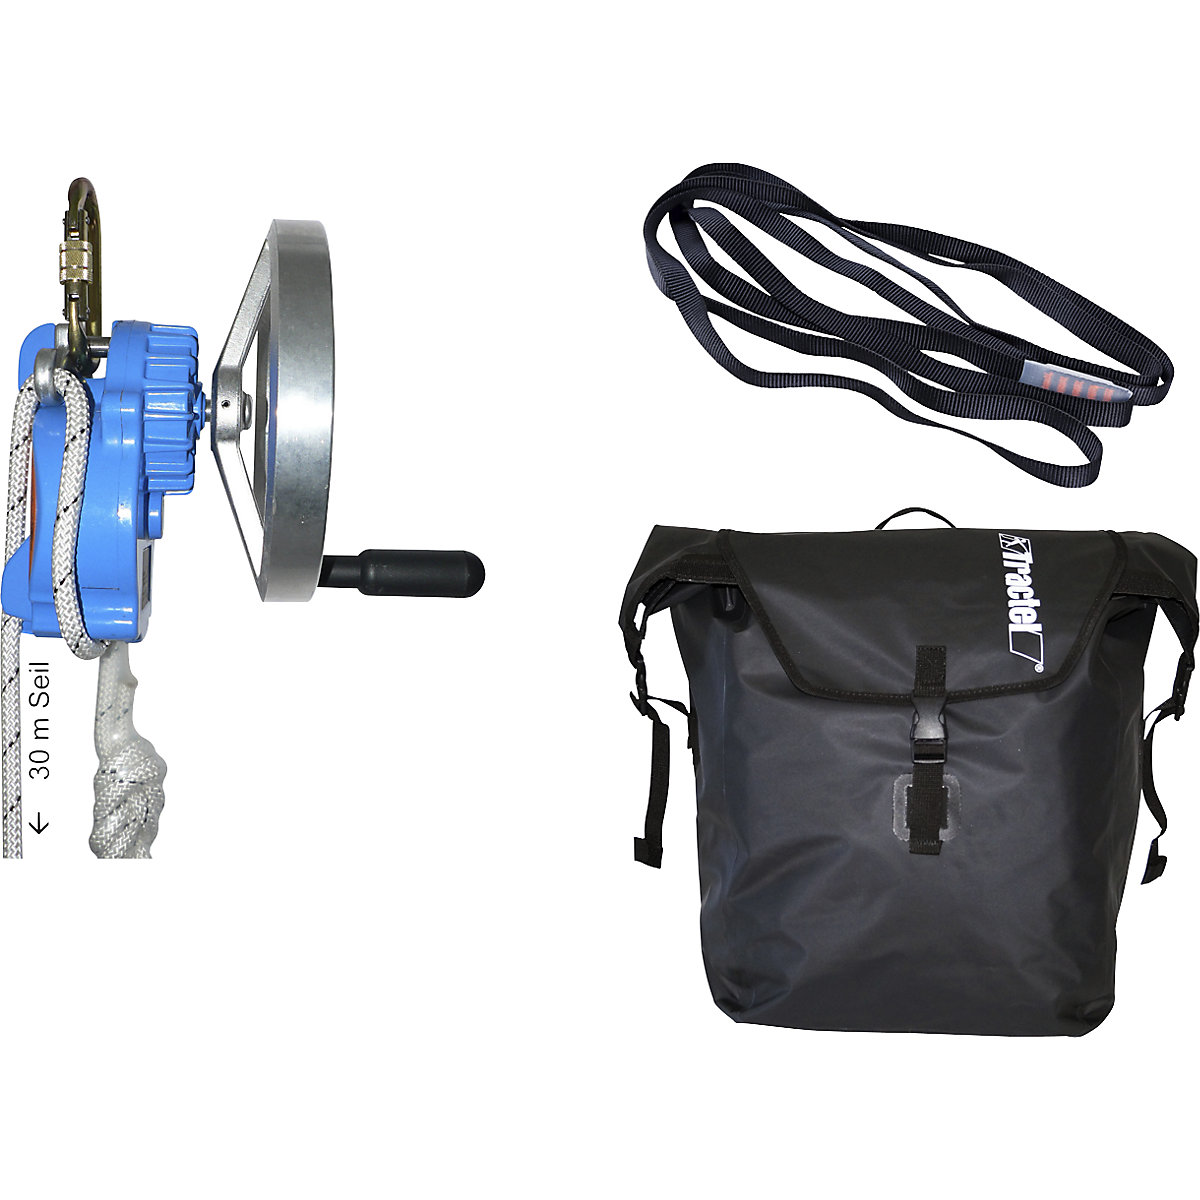 PPE fall protection set